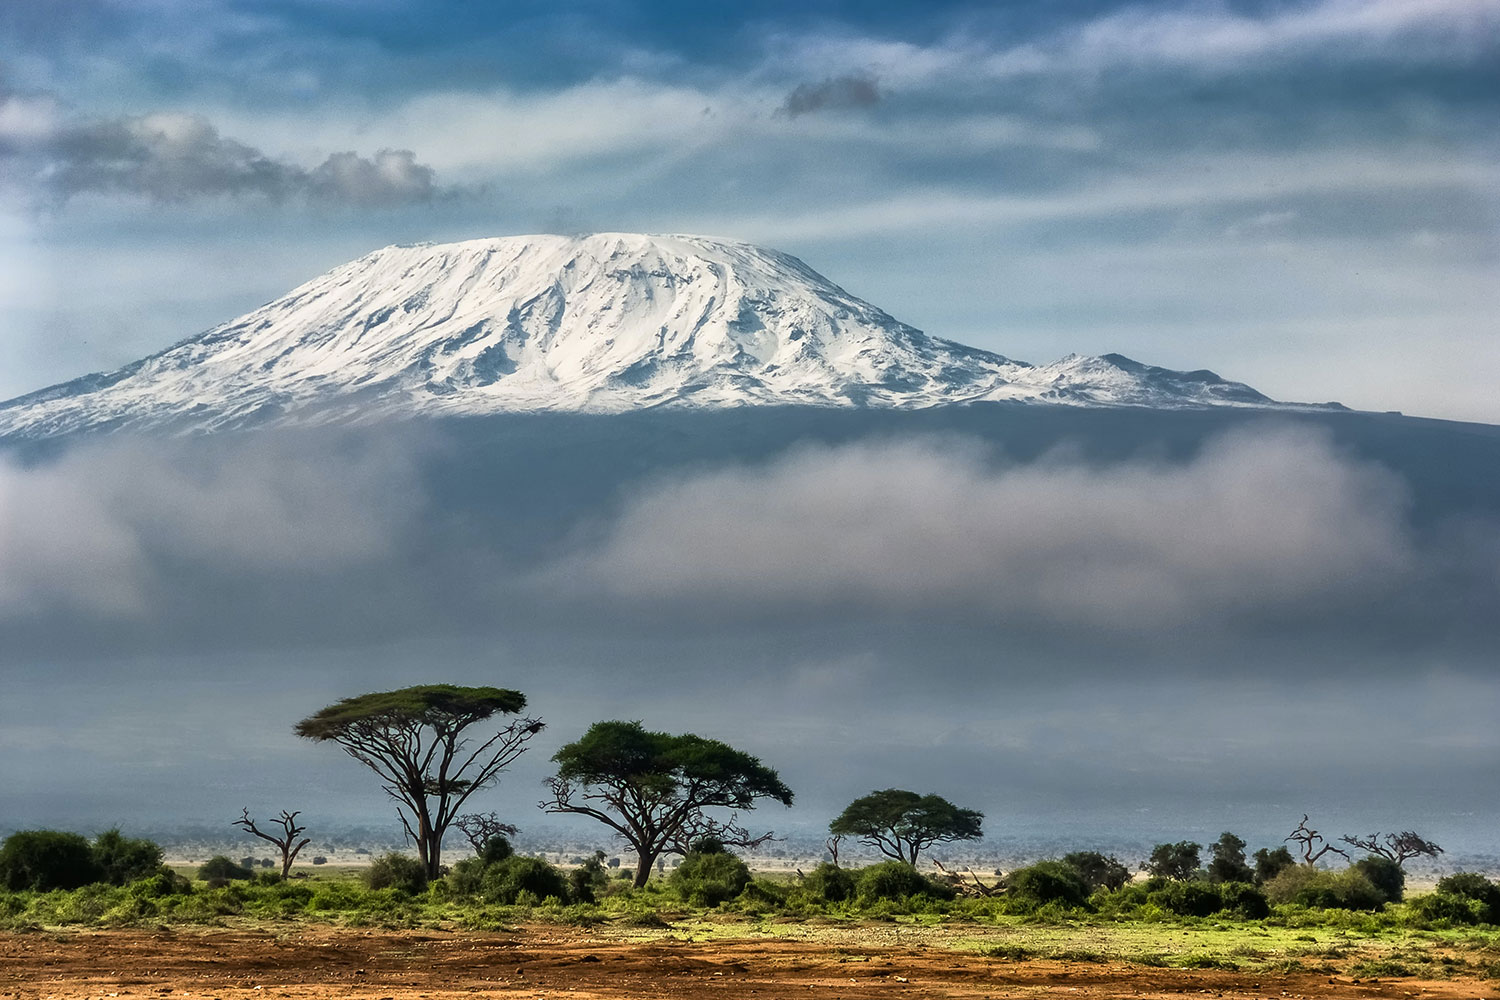 Gibb's Farm managers, Nick and Sally fulfilled a life-long dream of summiting Mount Kilimanjaro - and they did just that! Learn more about their experience